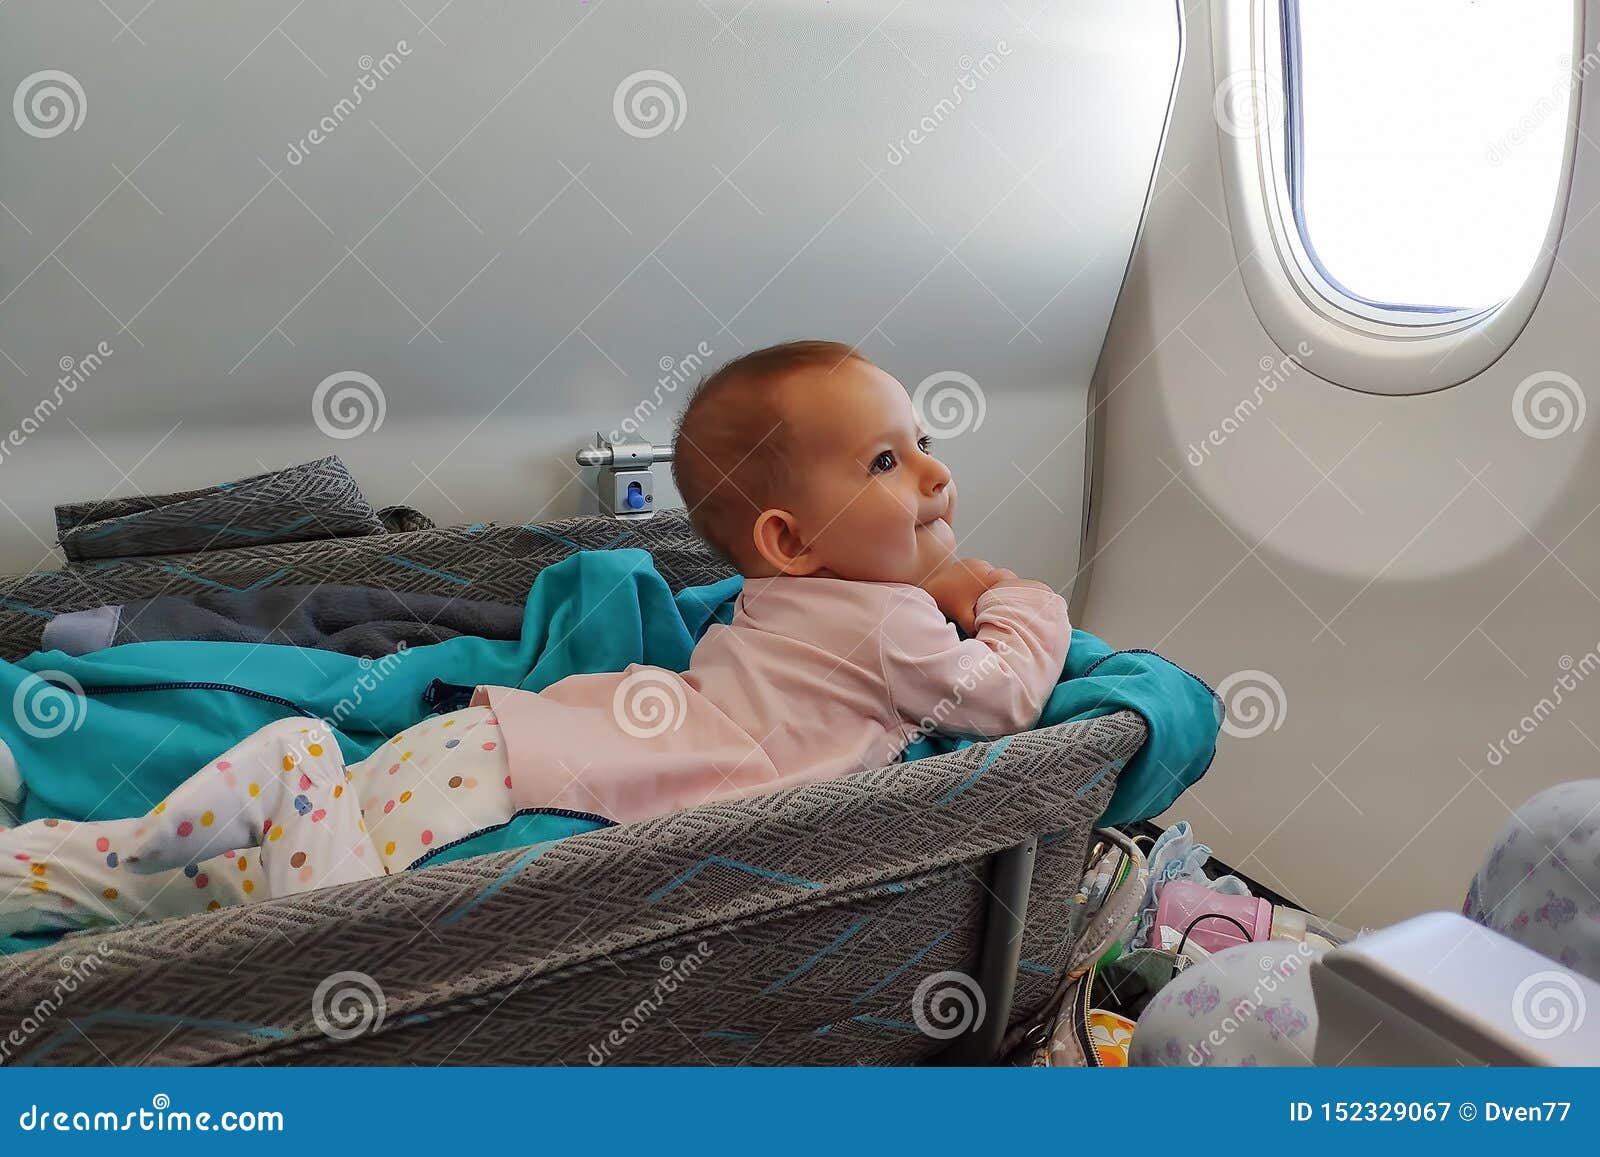 Airplane Bassinet - Free & Royalty-Free Stock Photos from Dreamstime